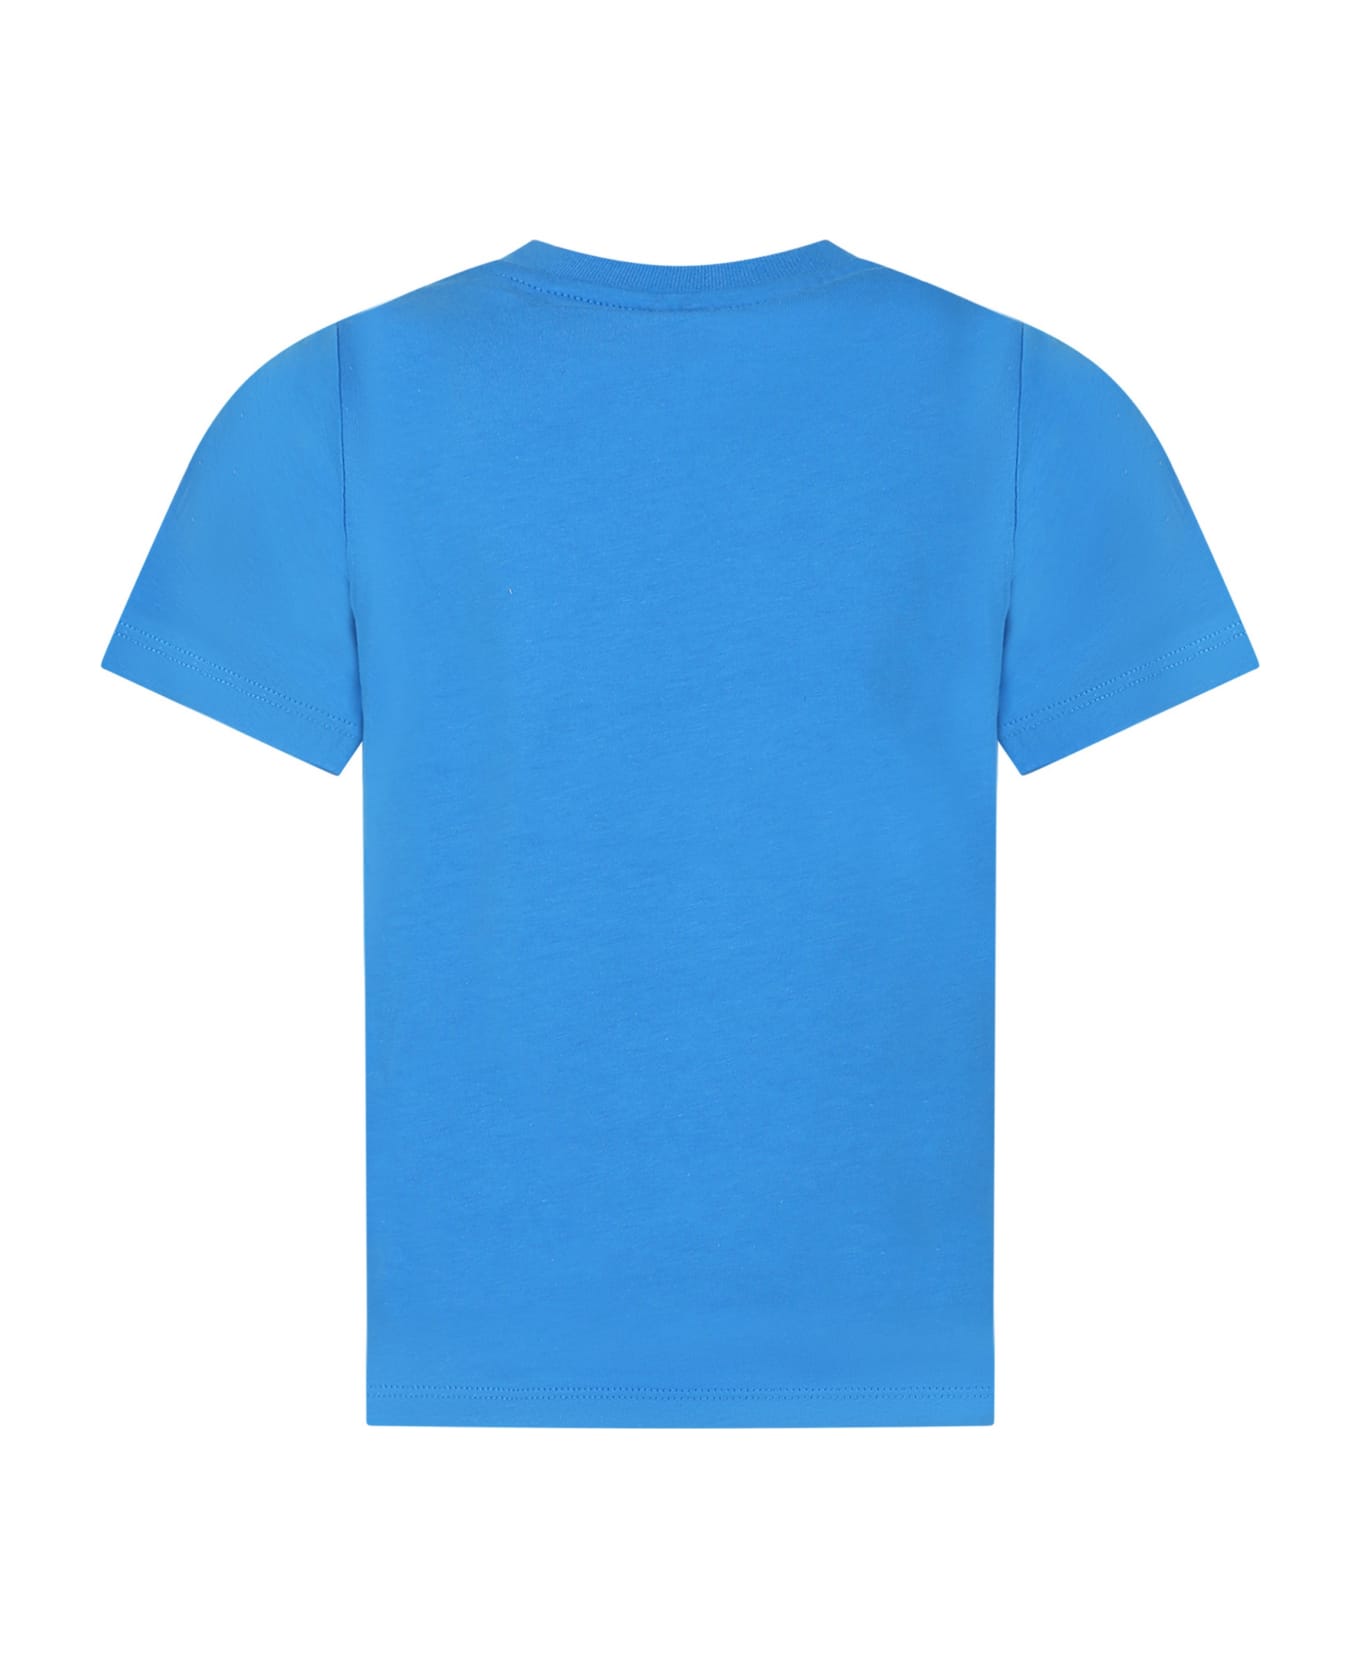 Stella McCartney Kids Blue T-shirt For Boy With Print And Writing - Blue